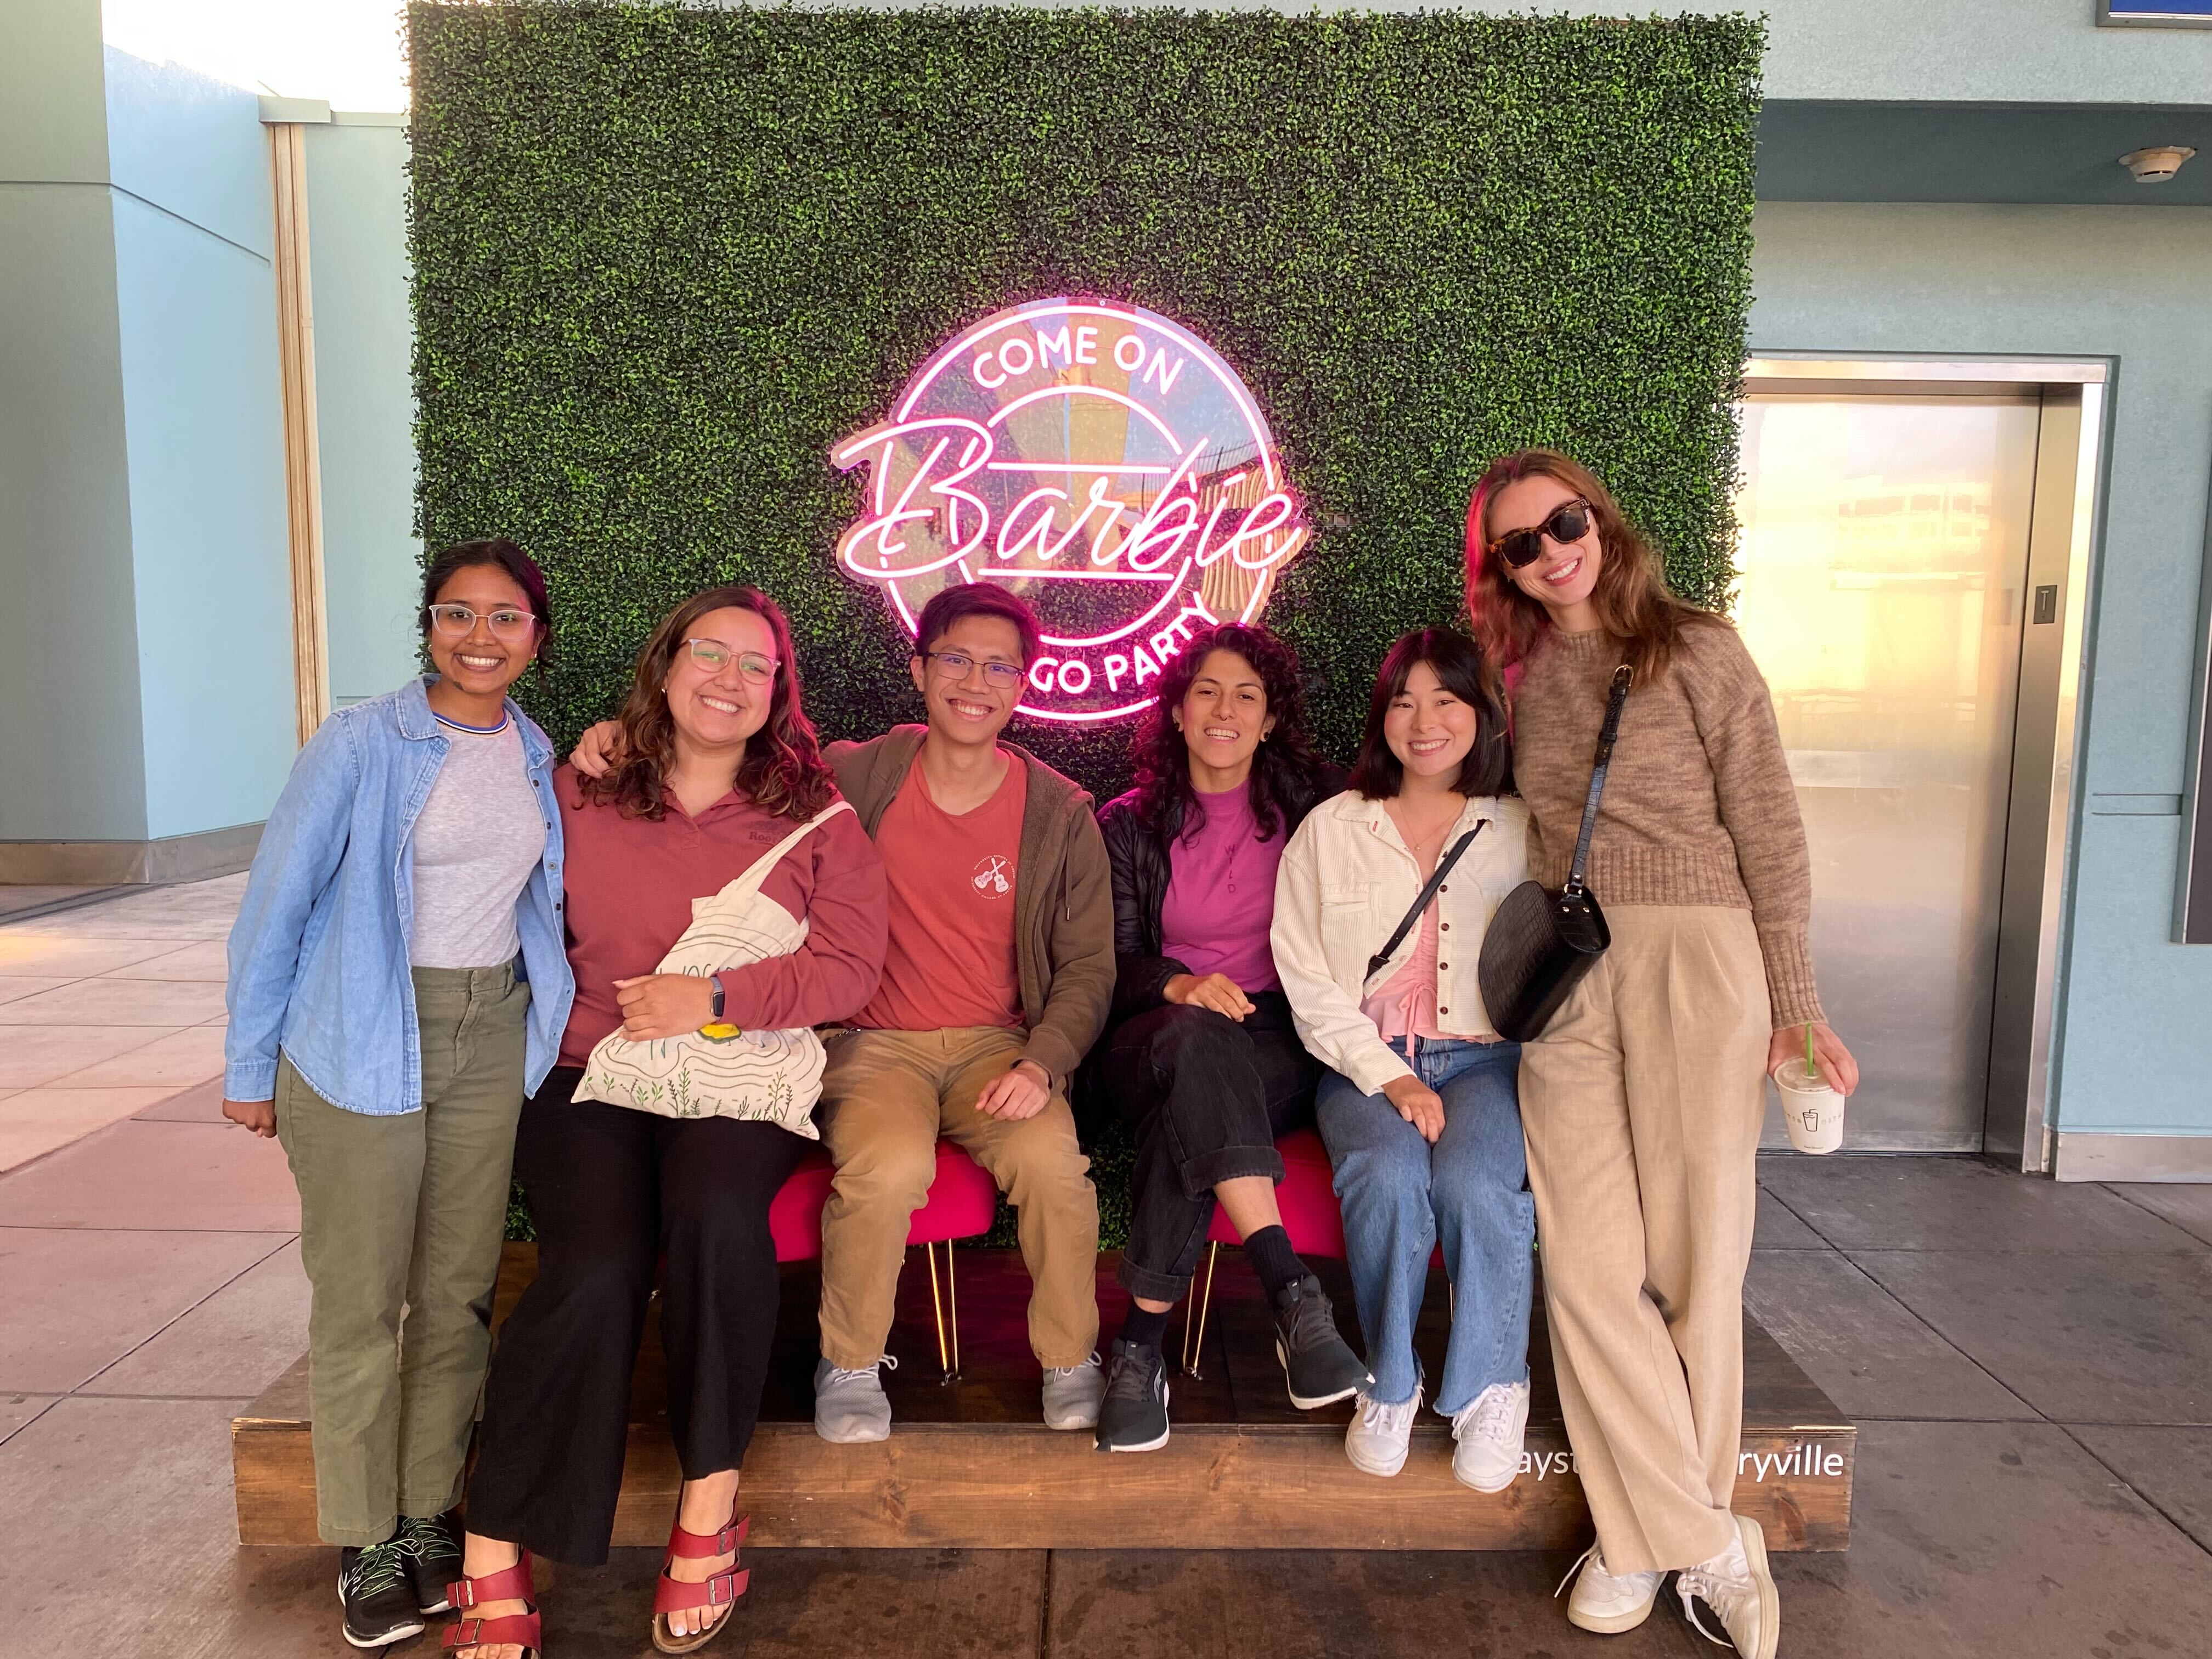 Ananya, Nicole, Kevin, Yakira, Elisa, and Caseysimone in front of a sign that says come on Barbie go party